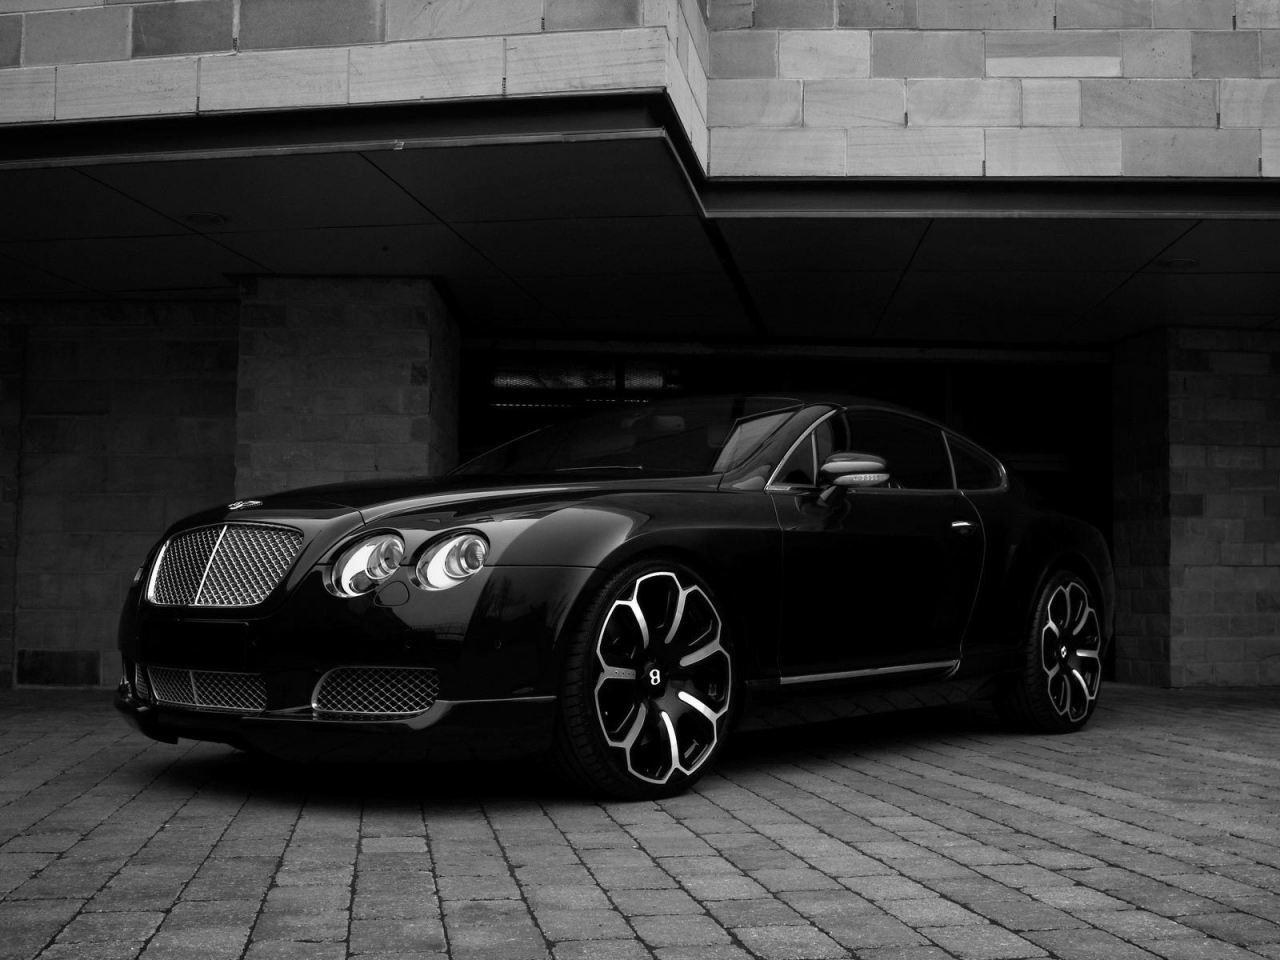 Black Bentley Front Angle for 1280 x 960 resolution